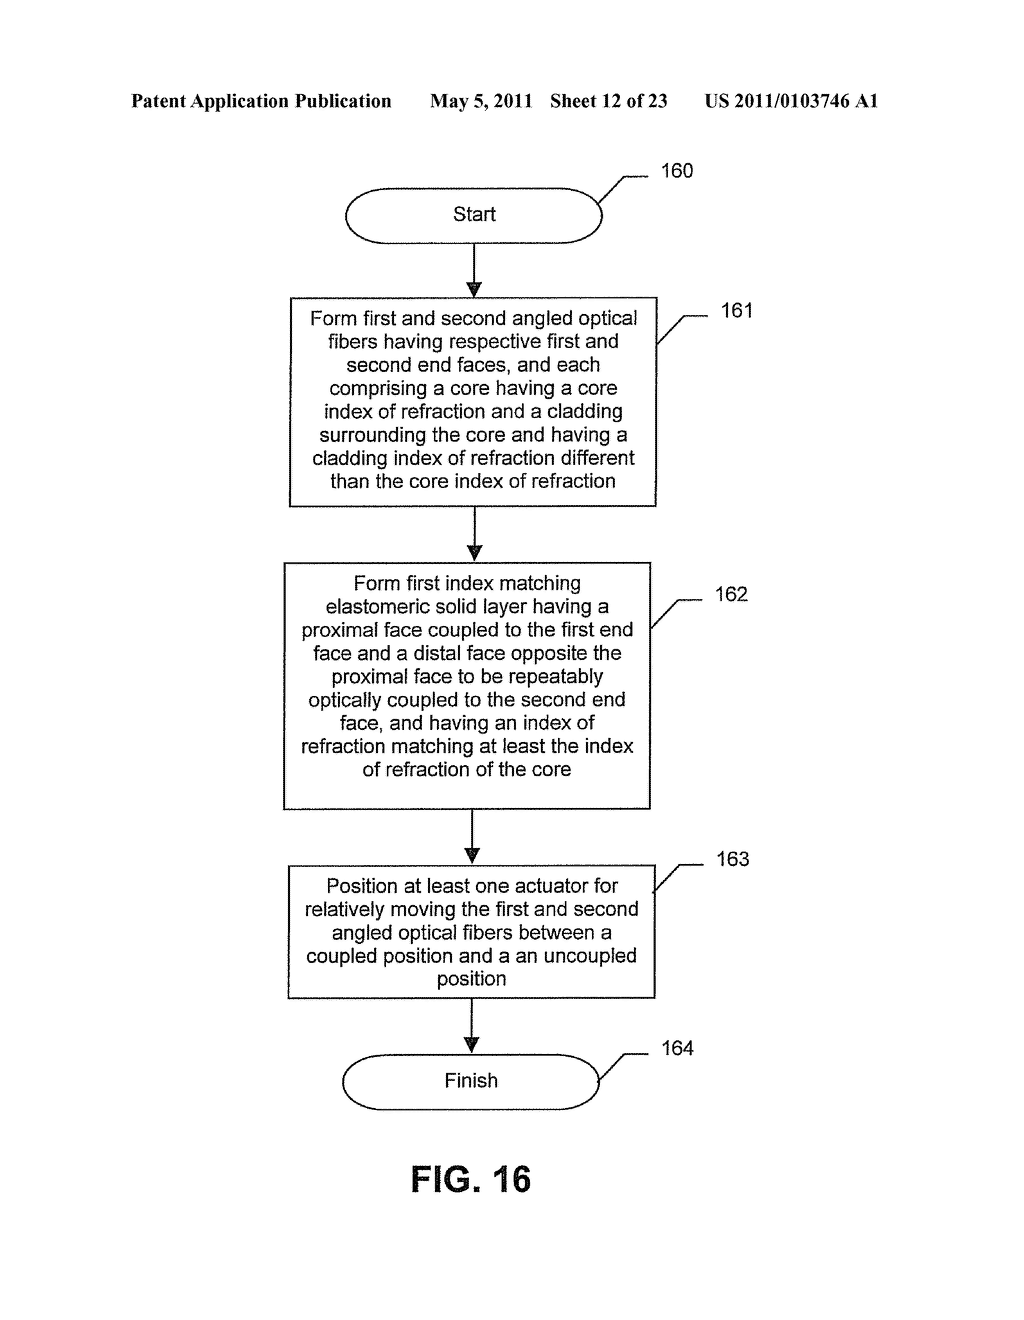 REPEATABLE OPTICAL WAVEGUIDE INTERCONNECTION INCLUDING AN INDEX MATCHING ELASTOMERIC SOLID LAYER PROVIDING CORE AND CLADDING INDEX OF REFRACTION MATCHING AND RELATED METHODS - diagram, schematic, and image 13